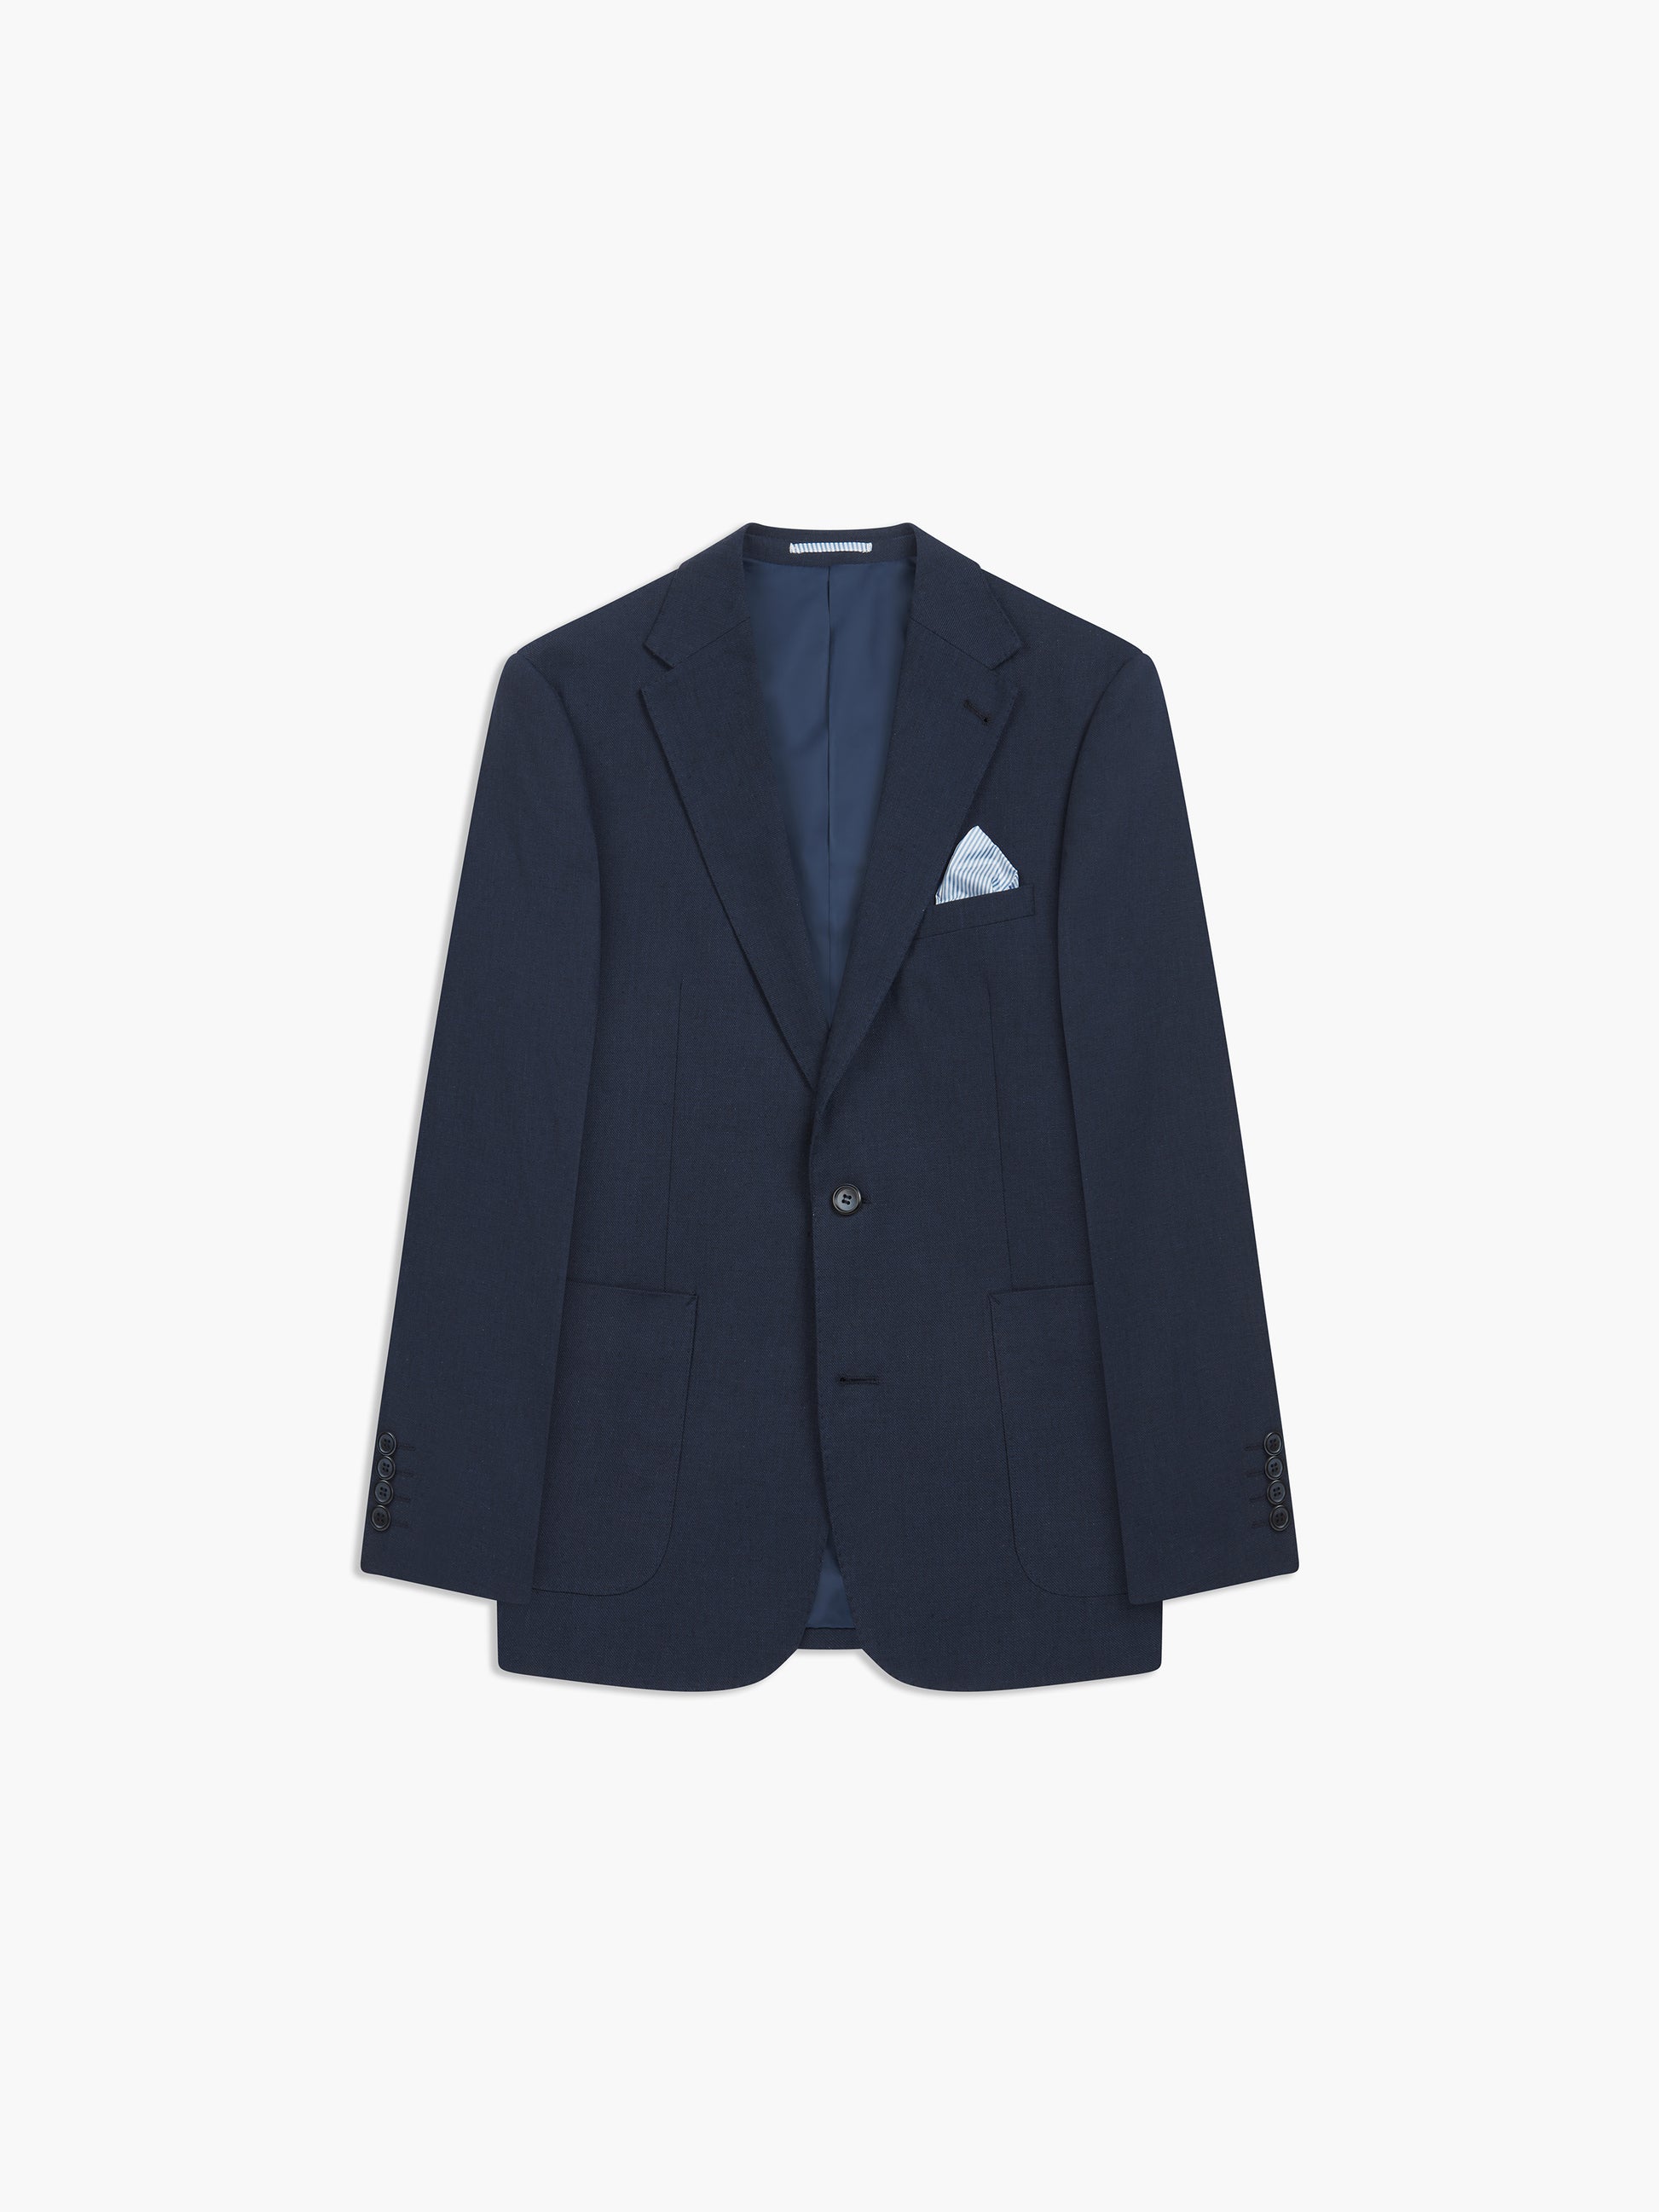 Image 7 of Slim Fit Single Breasted Linen Suit Jacket in Navy